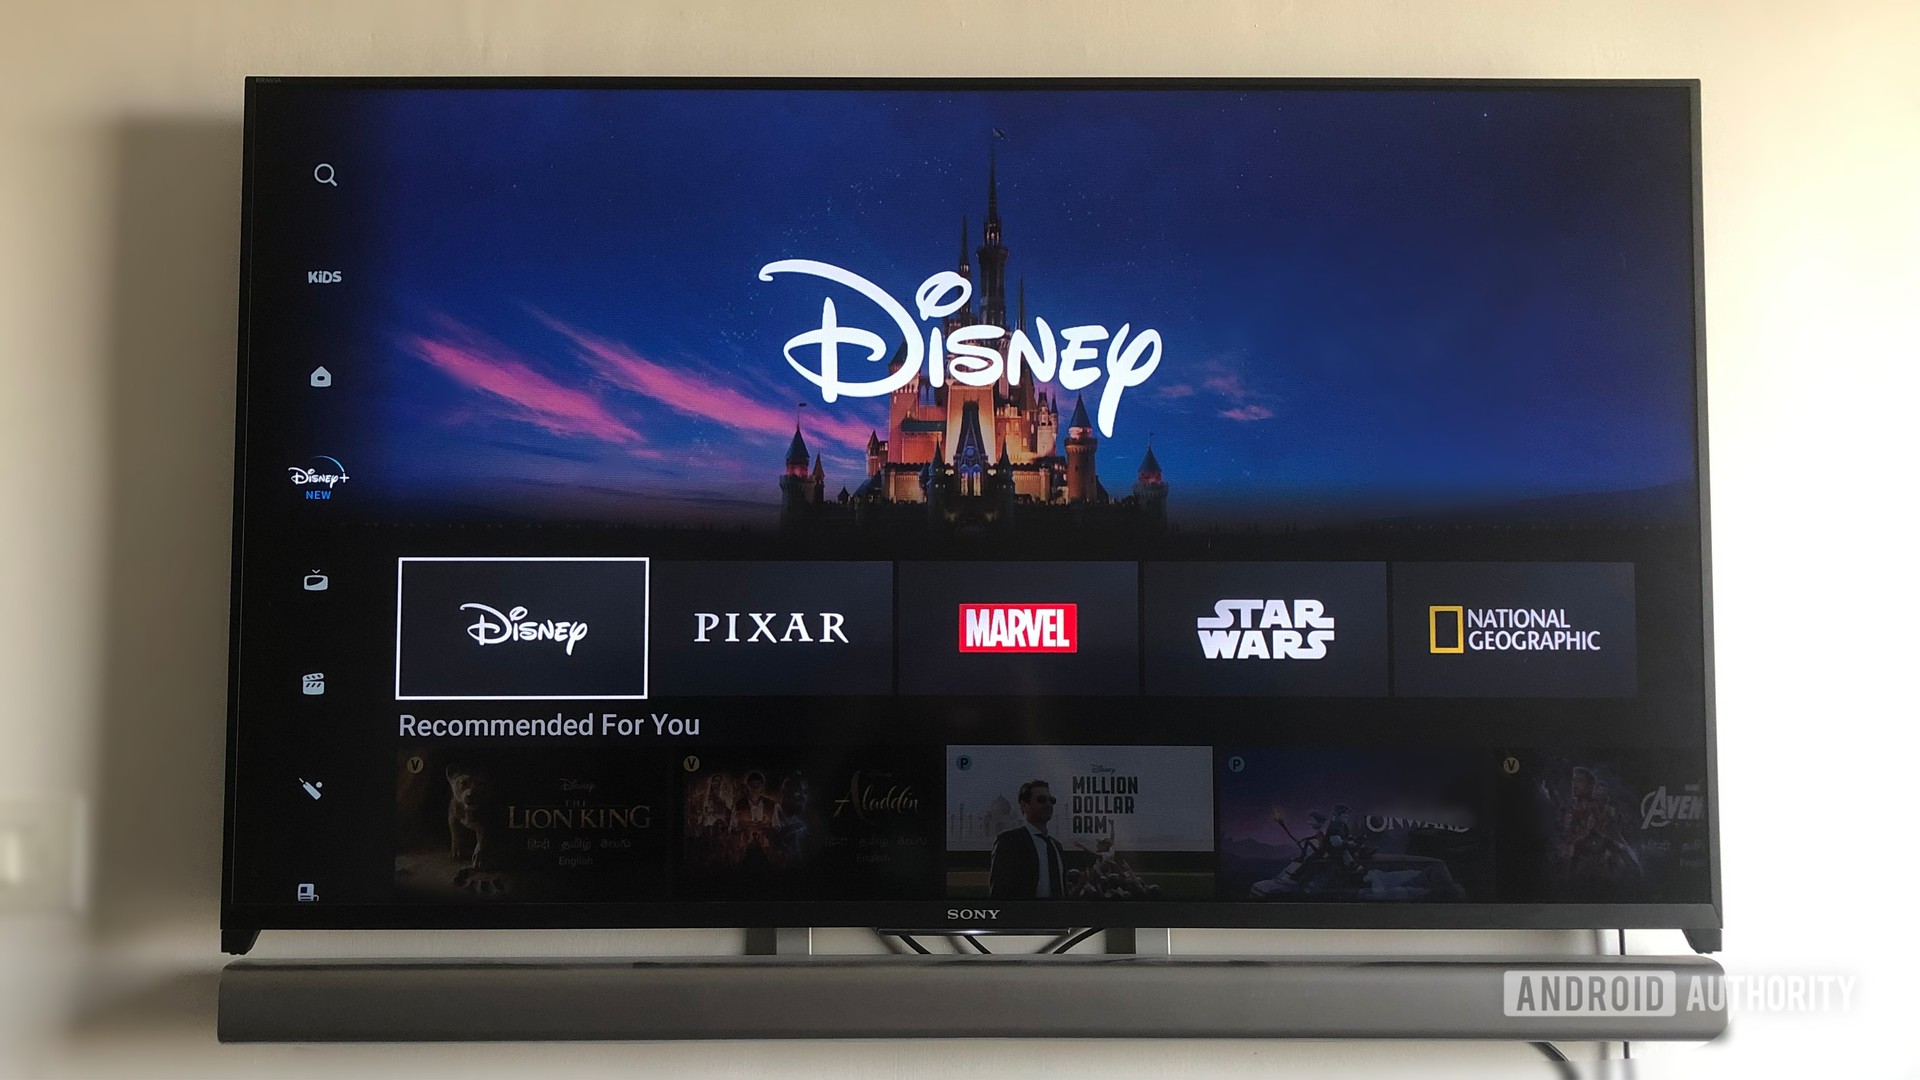 Disney Plus on Android TV or Box